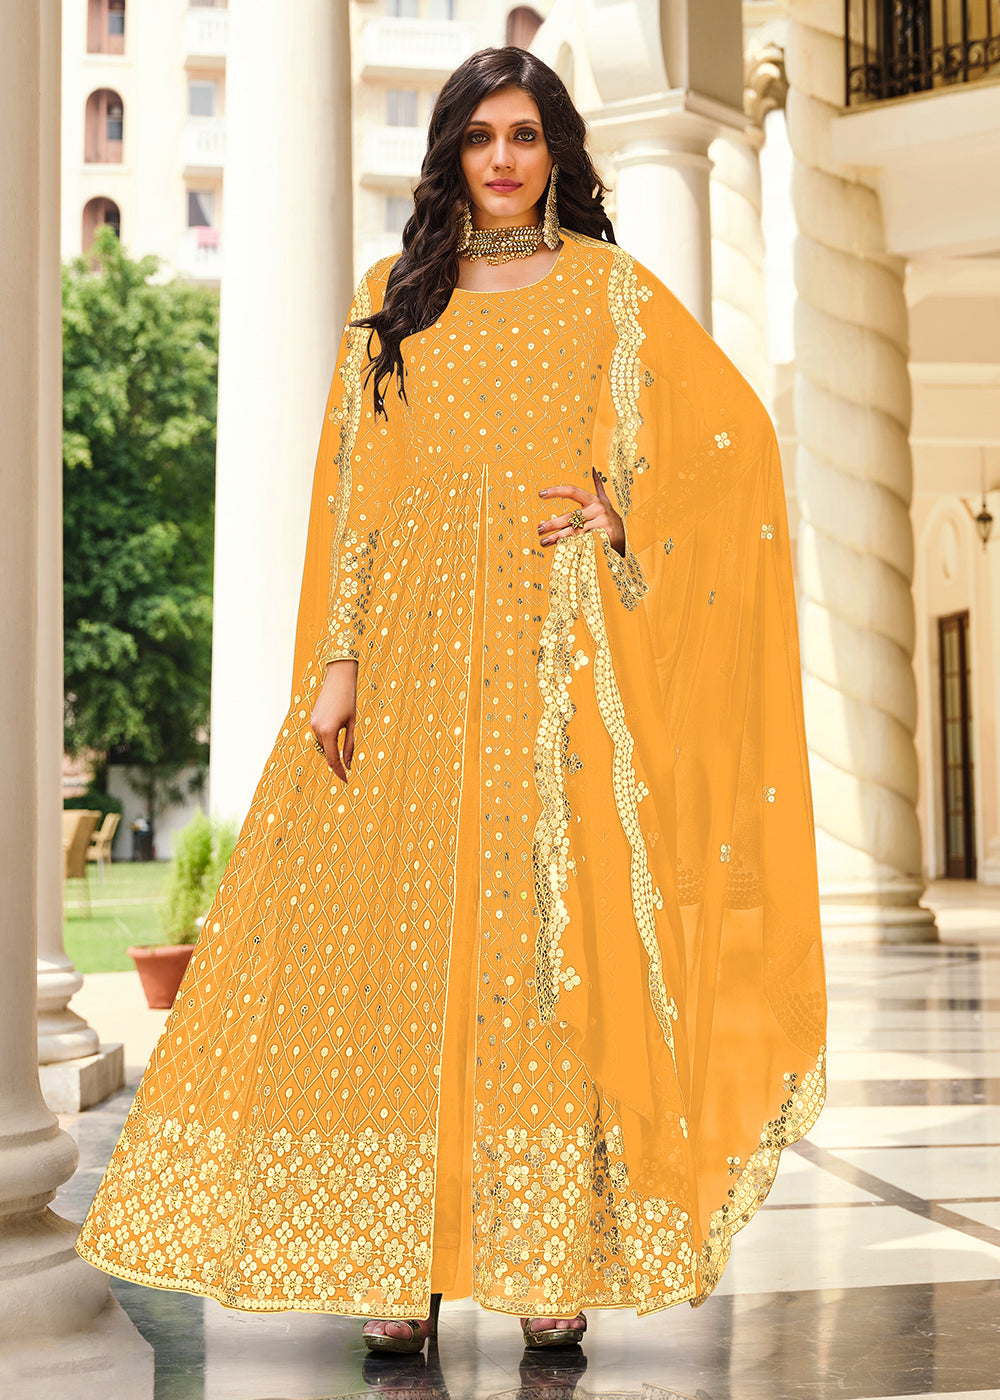 Buy Now Supreme Yellow Sequins Wedding Pant Style Anarkali Suit Online in USA, UK, Australia, New Zealand, Canada & Worldwide at Empress Clothing.